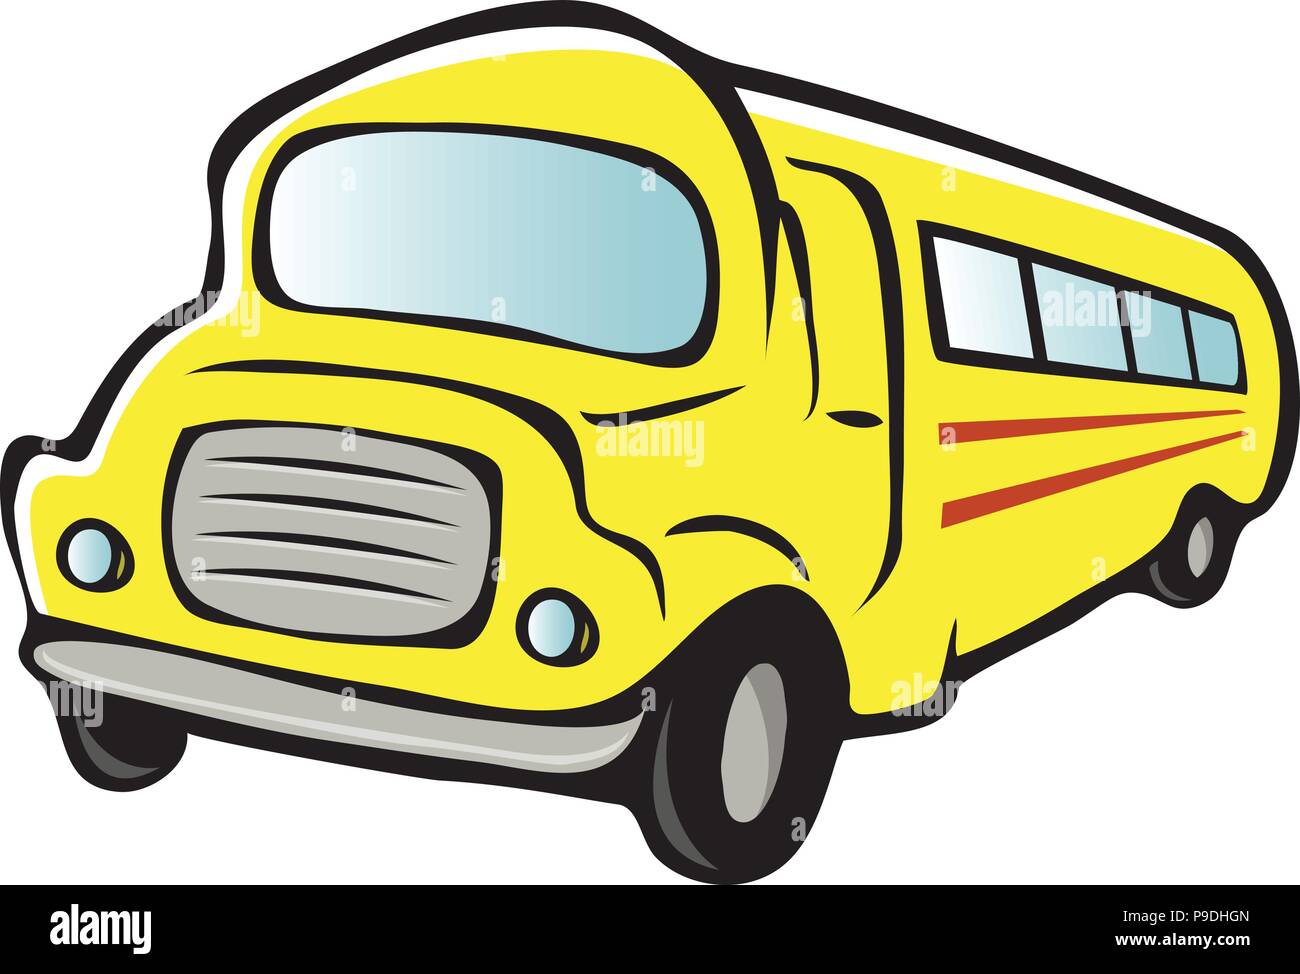 Featured image of post Vector Bus Cartoon Images Pngtree offers over 50 cartoon bus png and vector images as well as transparant background cartoon bus clipart images and psd files download the free graphic resources in the in addition to png format images you can also find cartoon bus vectors psd files and hd background images